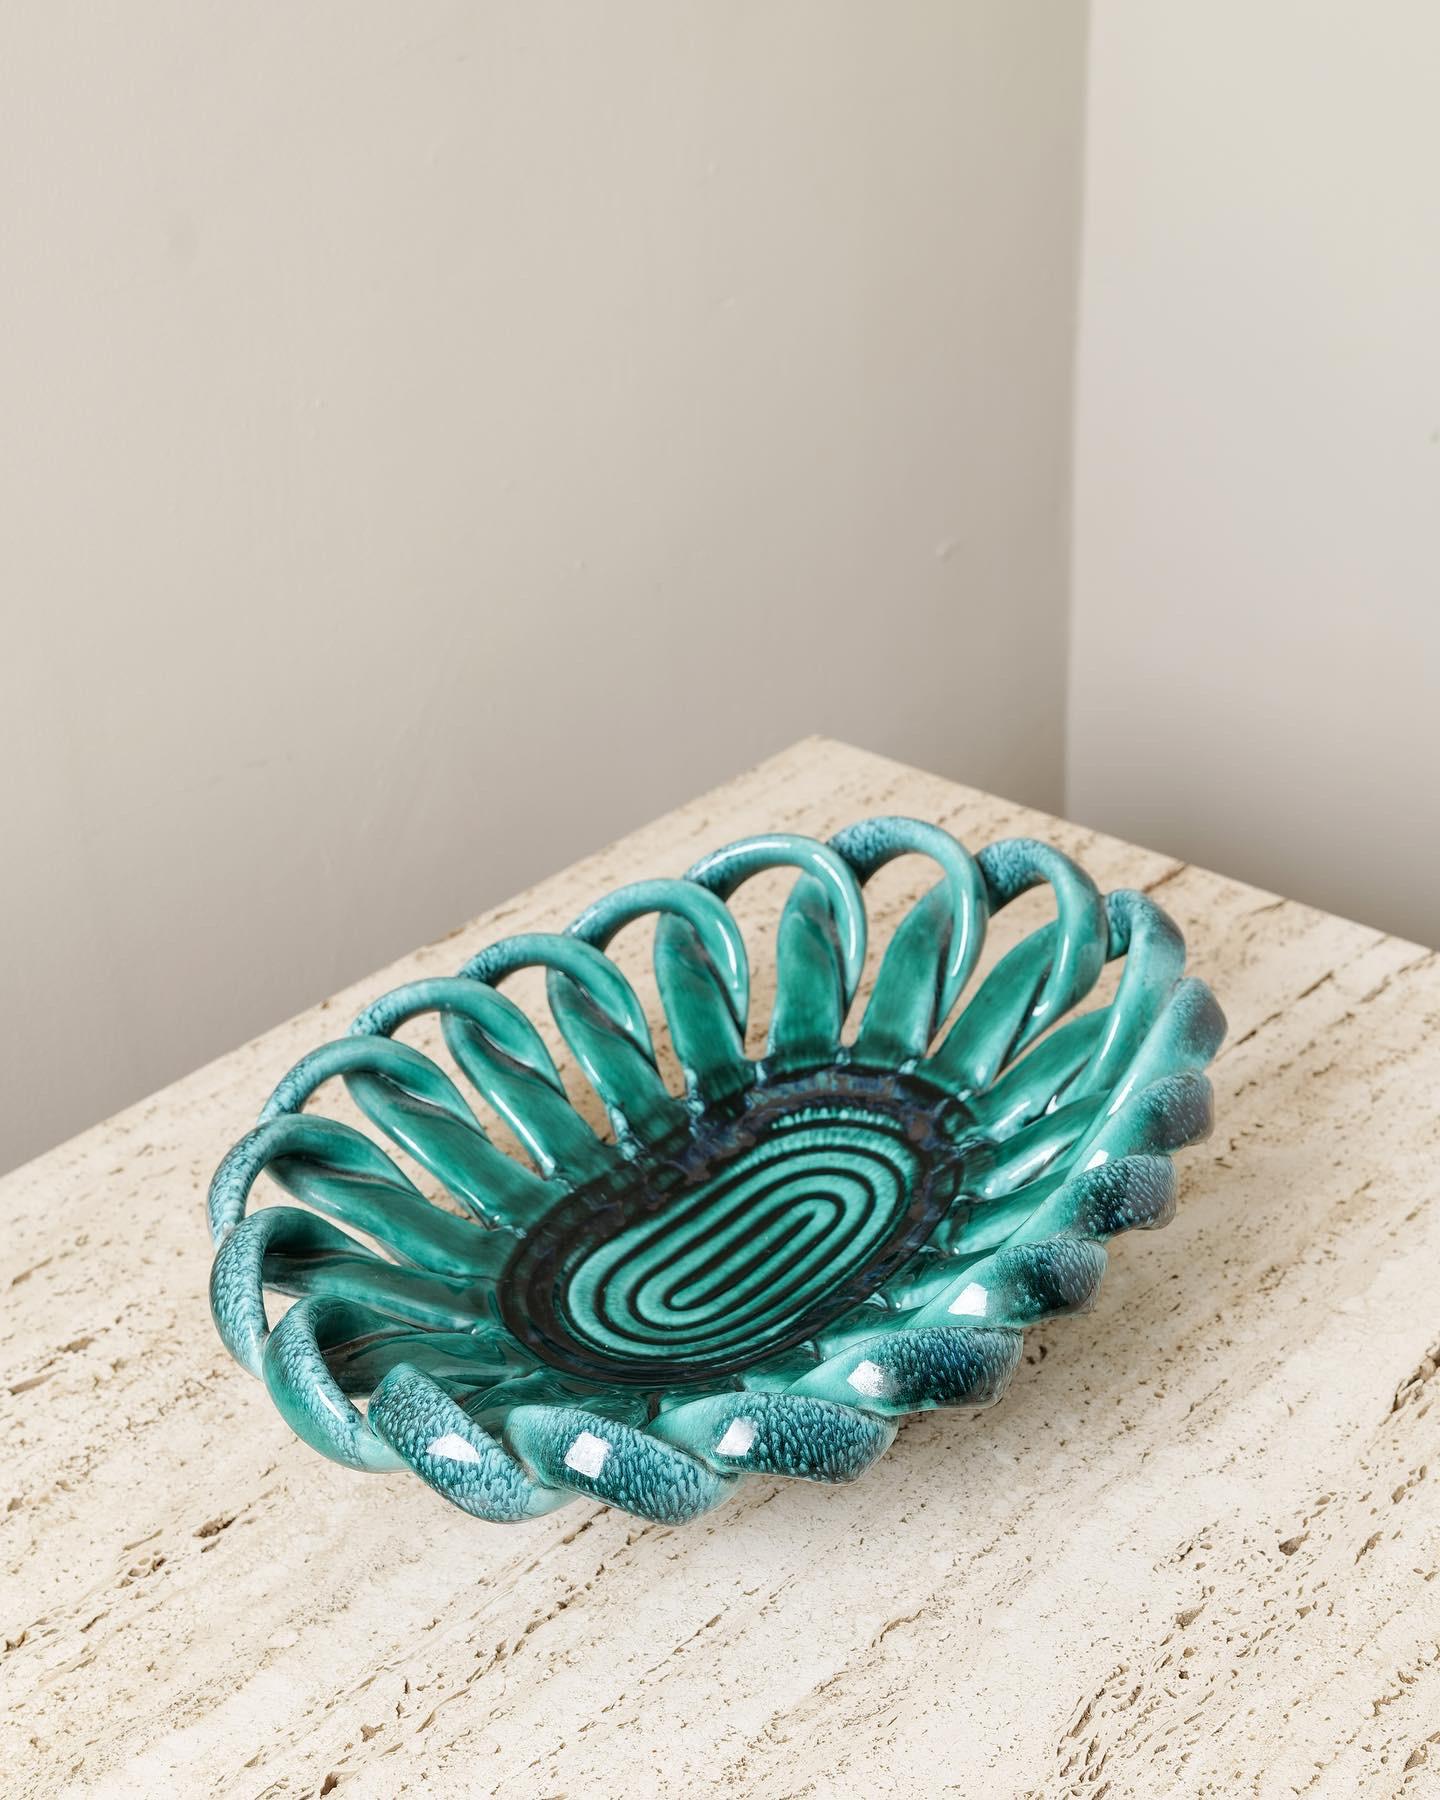 Stunning Jewel green 1960s Vallauris bowl designed by Jerome Massier. 

Chunky braided edging and a internal swirl detail. 

Signed and numbered on the base. 

Wonderful condition. One very small surface chip to the base of the dish.